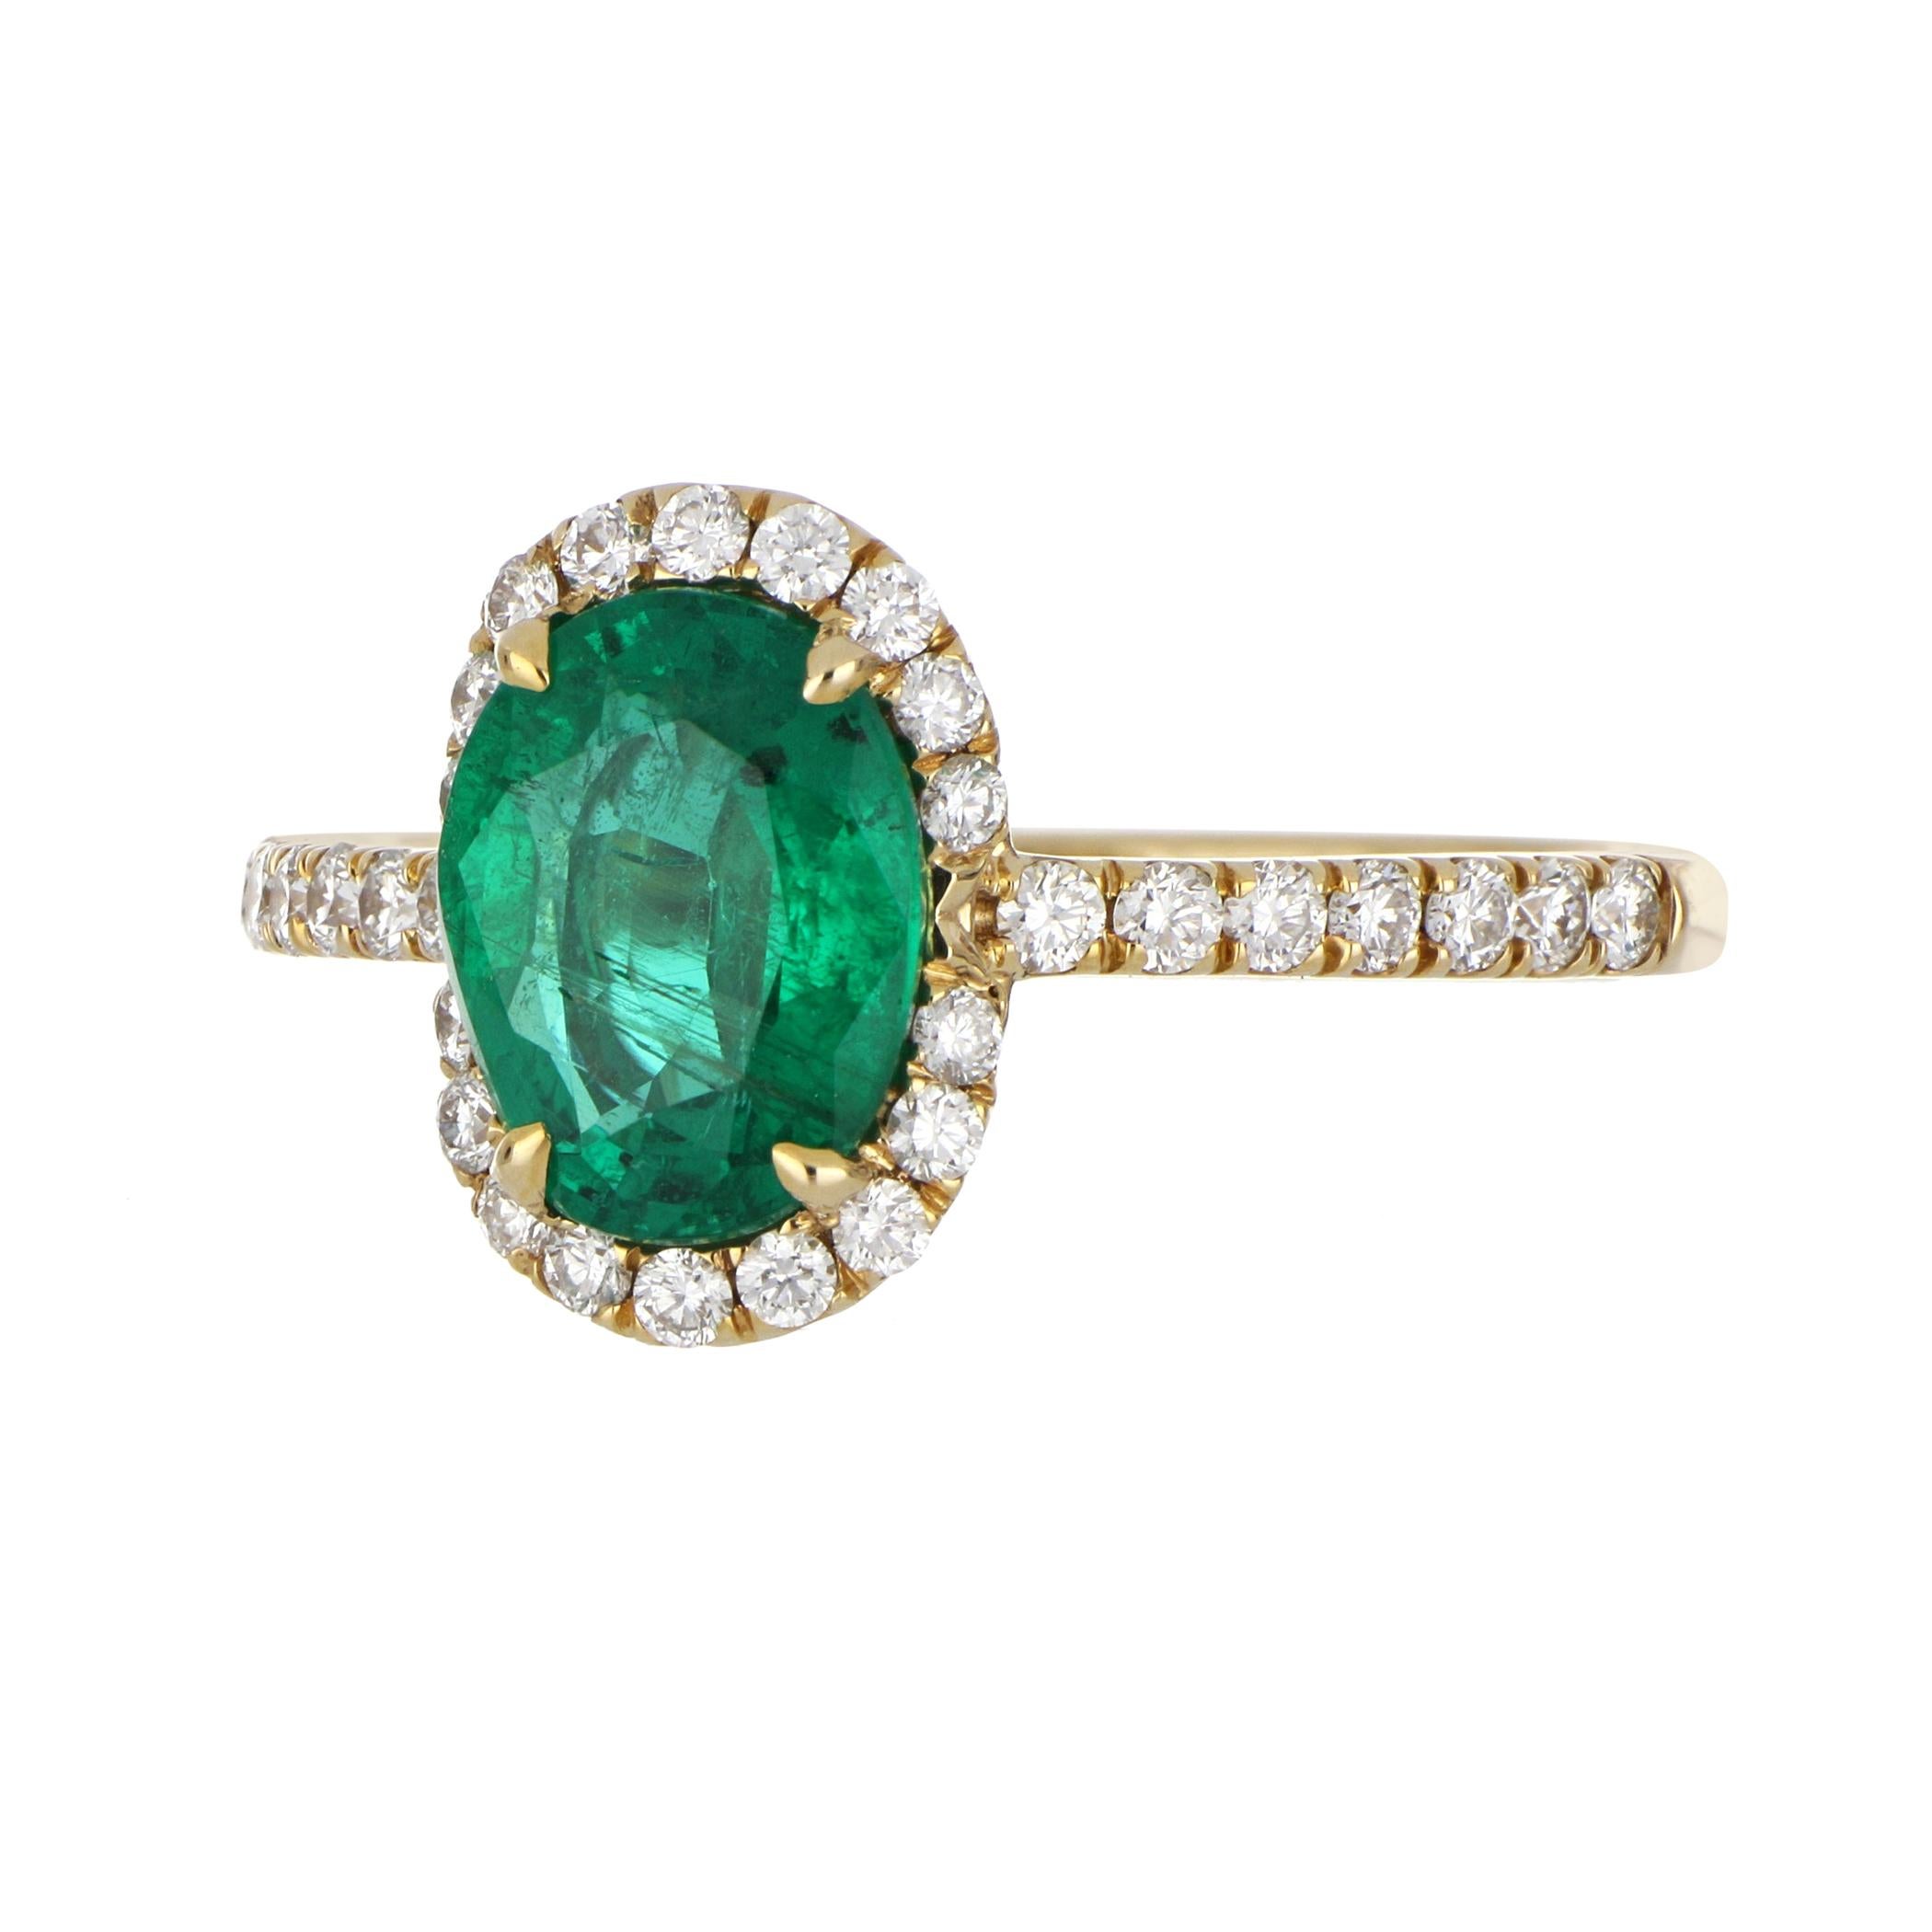 Elegant and exquisitely detailed Cocktail 14 K Ring, centre set with 1.73 Cts. Oval Cut Emerald. Surrounded with Diamonds, weighing approx. 0.43 ct. Beautifully Hand crafted in 14 Karat Yellow Gold.

Stone Size:
Emerald: 9 x 7 


Gemstone Carat